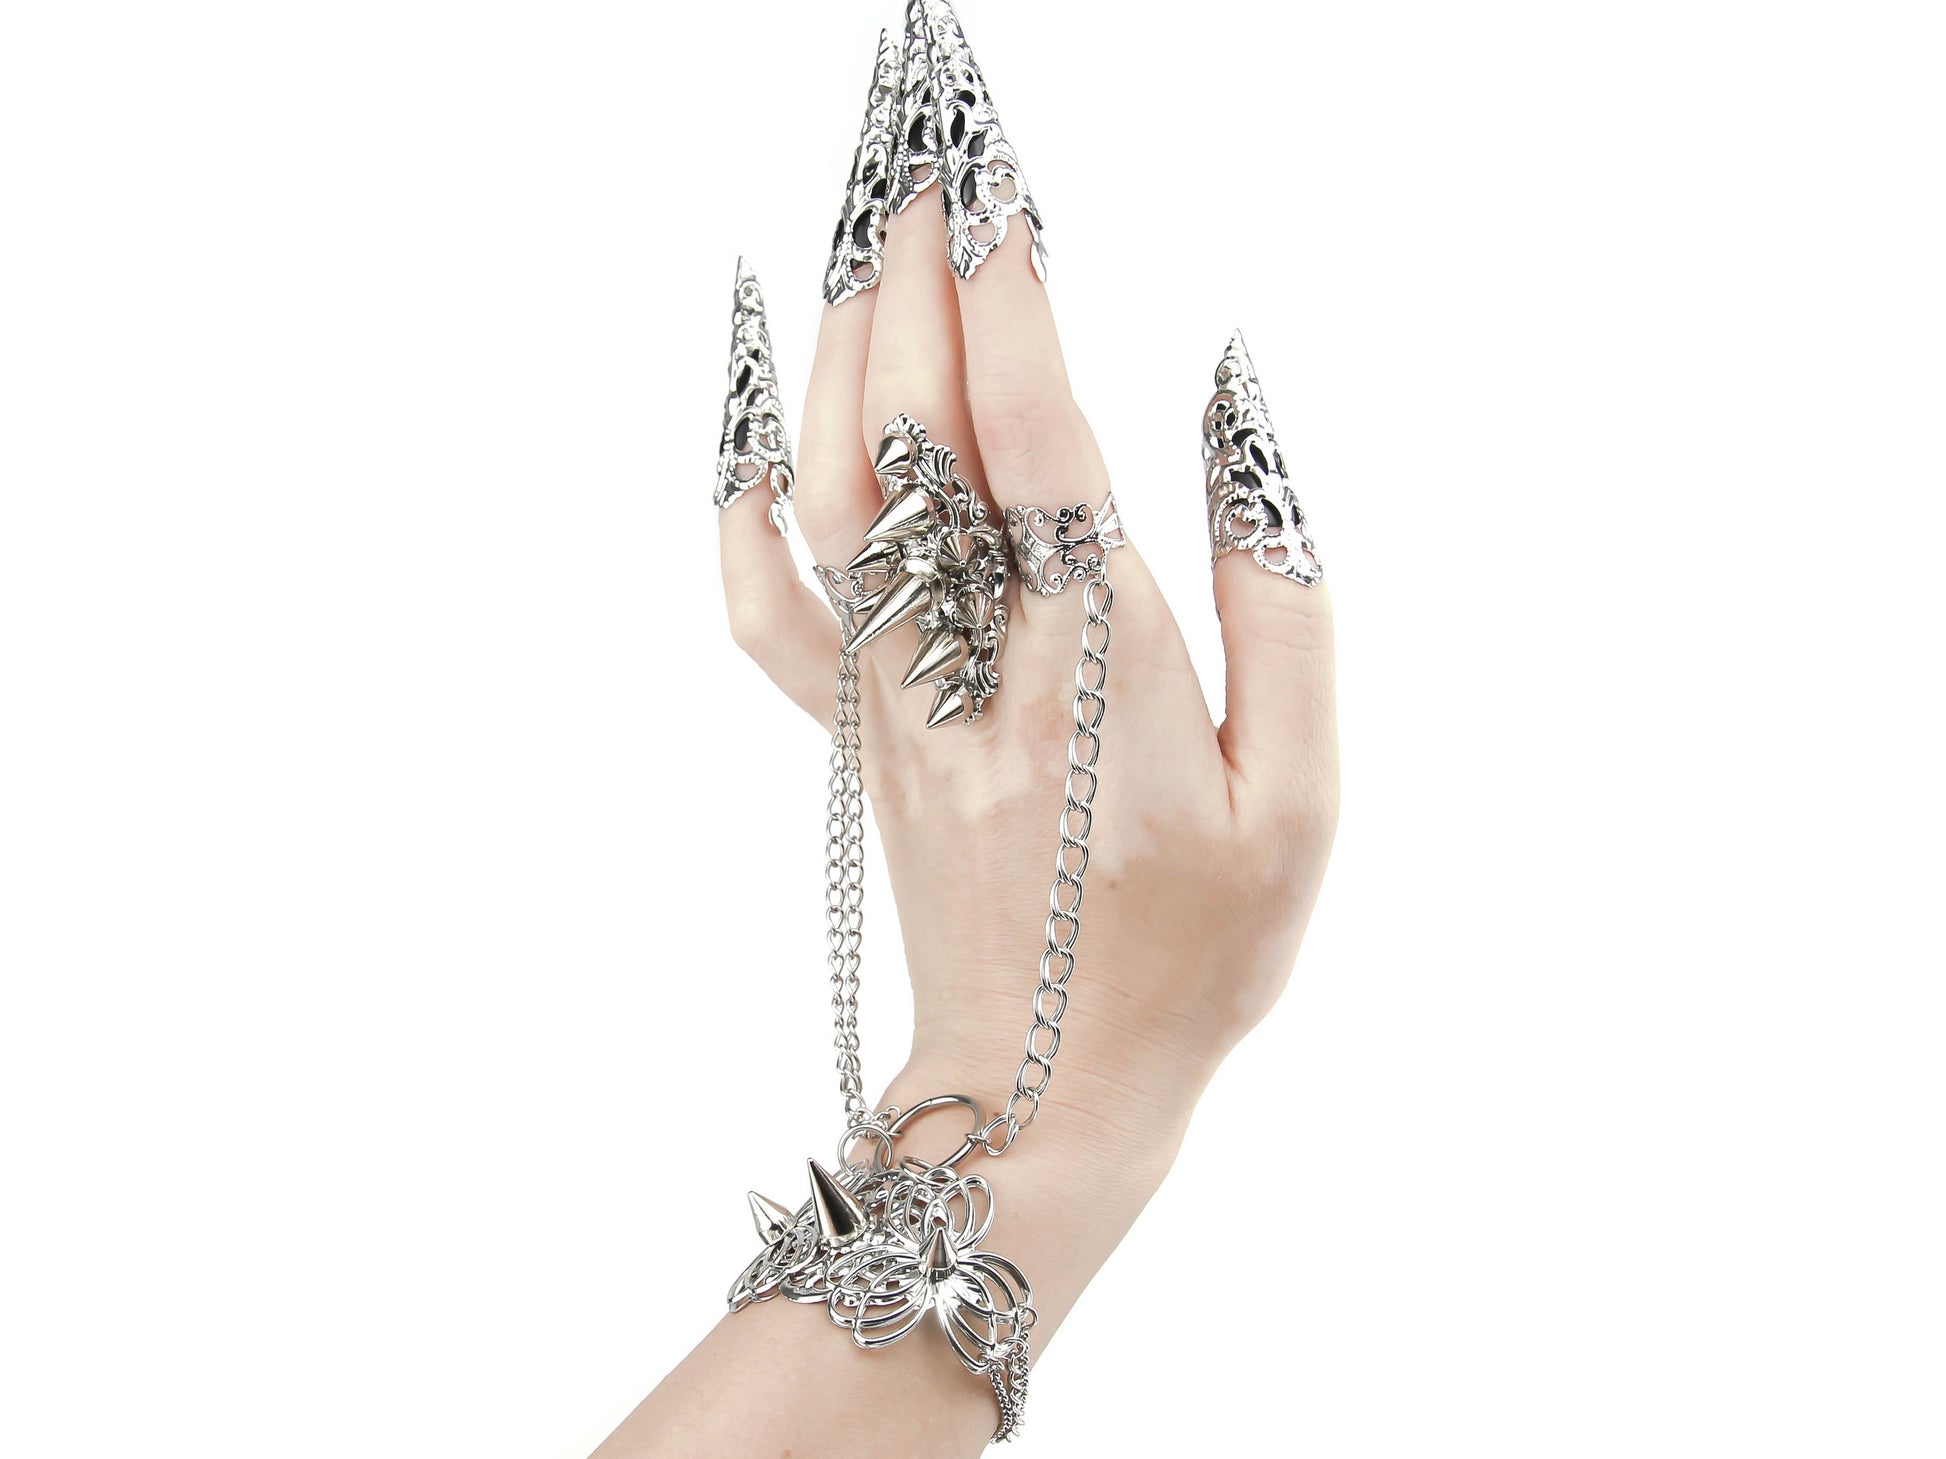 Capture the essence of punk rebellion with Myril Jewels' edgy studded ring with matching hand chain bracelet ring and nail claw rings . These bold statement pieces, with its sharp studs and metallic finish, are a must-have for lovers of dark-avantgarde and gothic accessories. Ideal for Halloween, it also complements everyday minimal goth looks, Witchcore styles, and Gothic-chic ensembles, offering a versatile addition to any Neo Gothic jewel collection